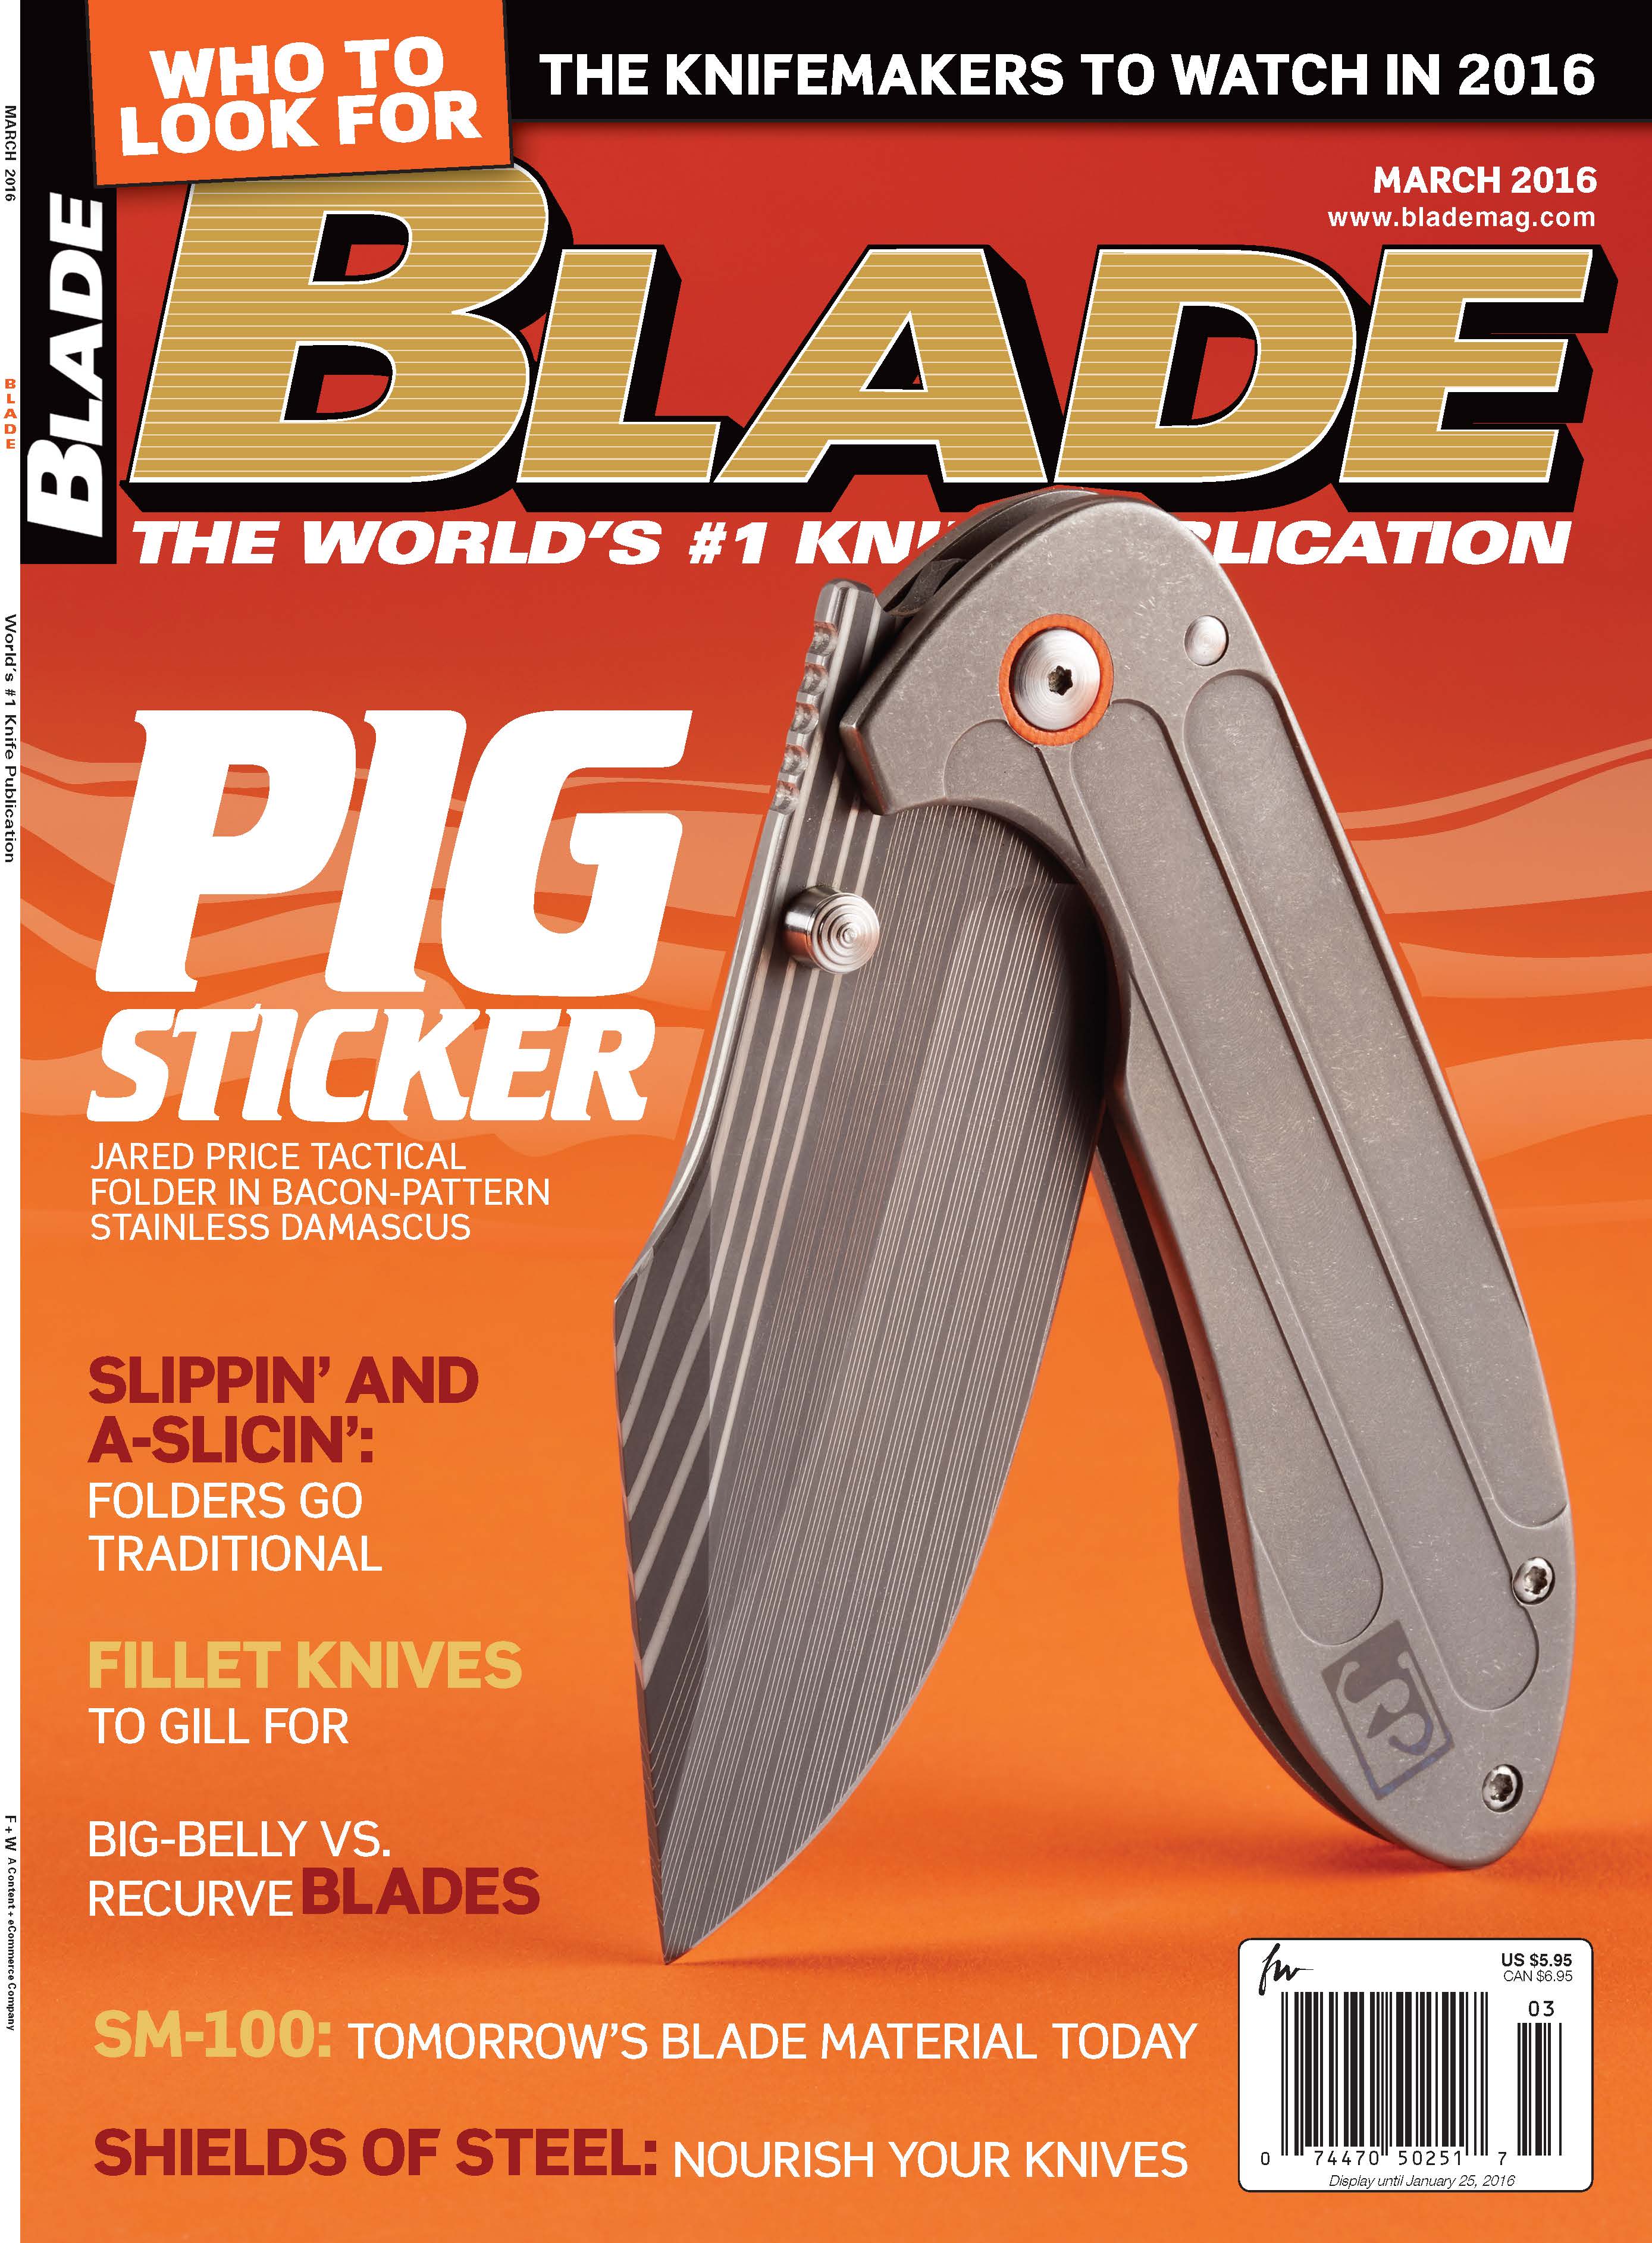 Makers to Watch in 2016 Top New BLADE®